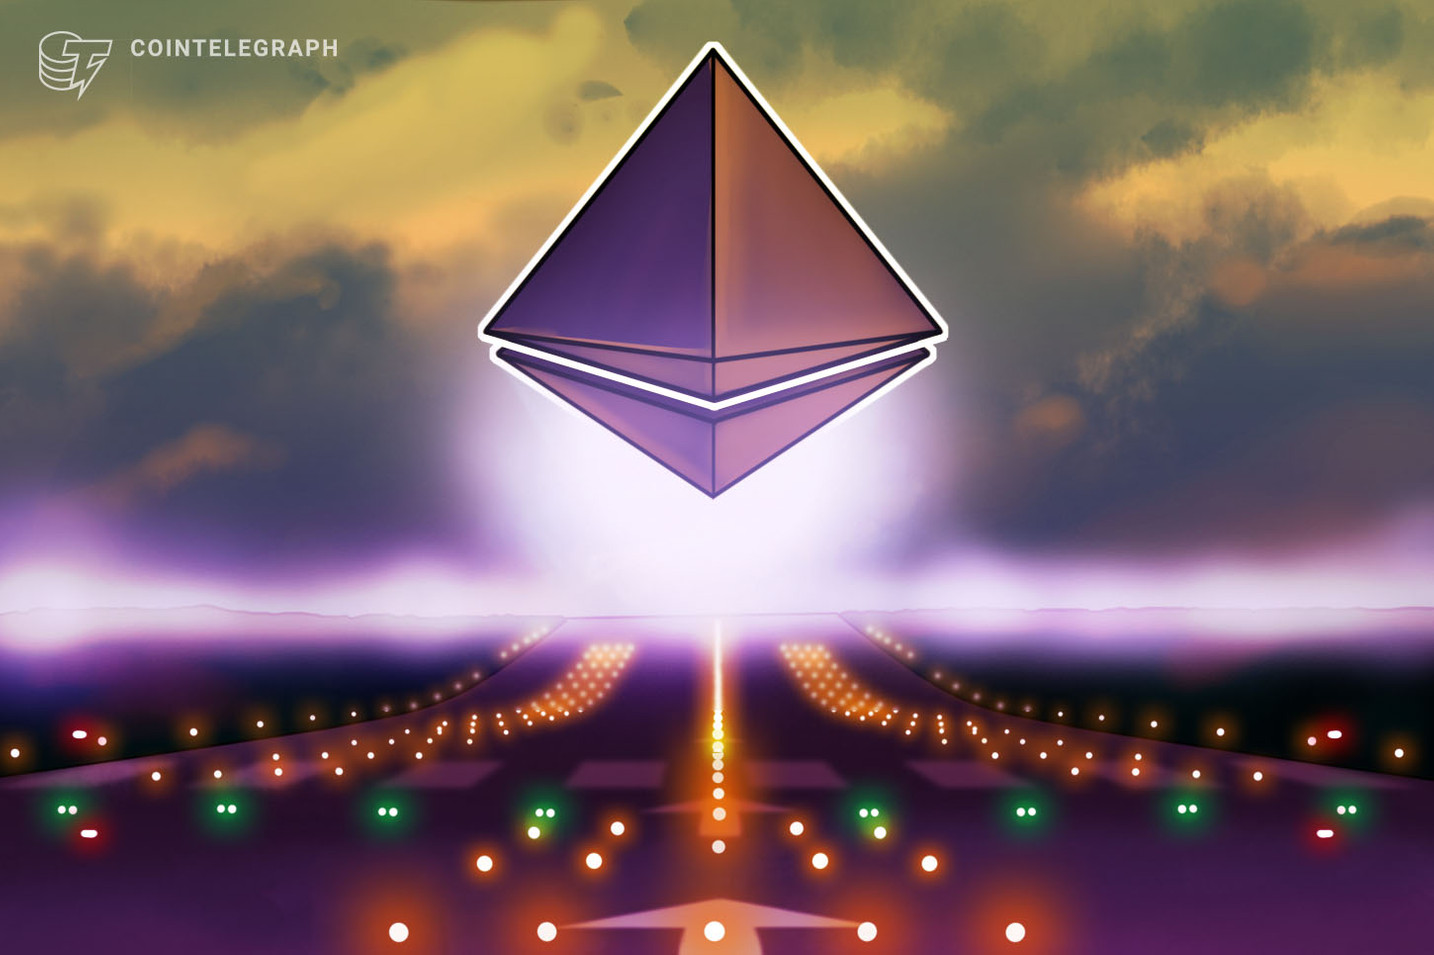 Ethereum's market value has surpassed Coca-Cola, Berkshire Hathaway, and Roche since peaking over $300 billion this week